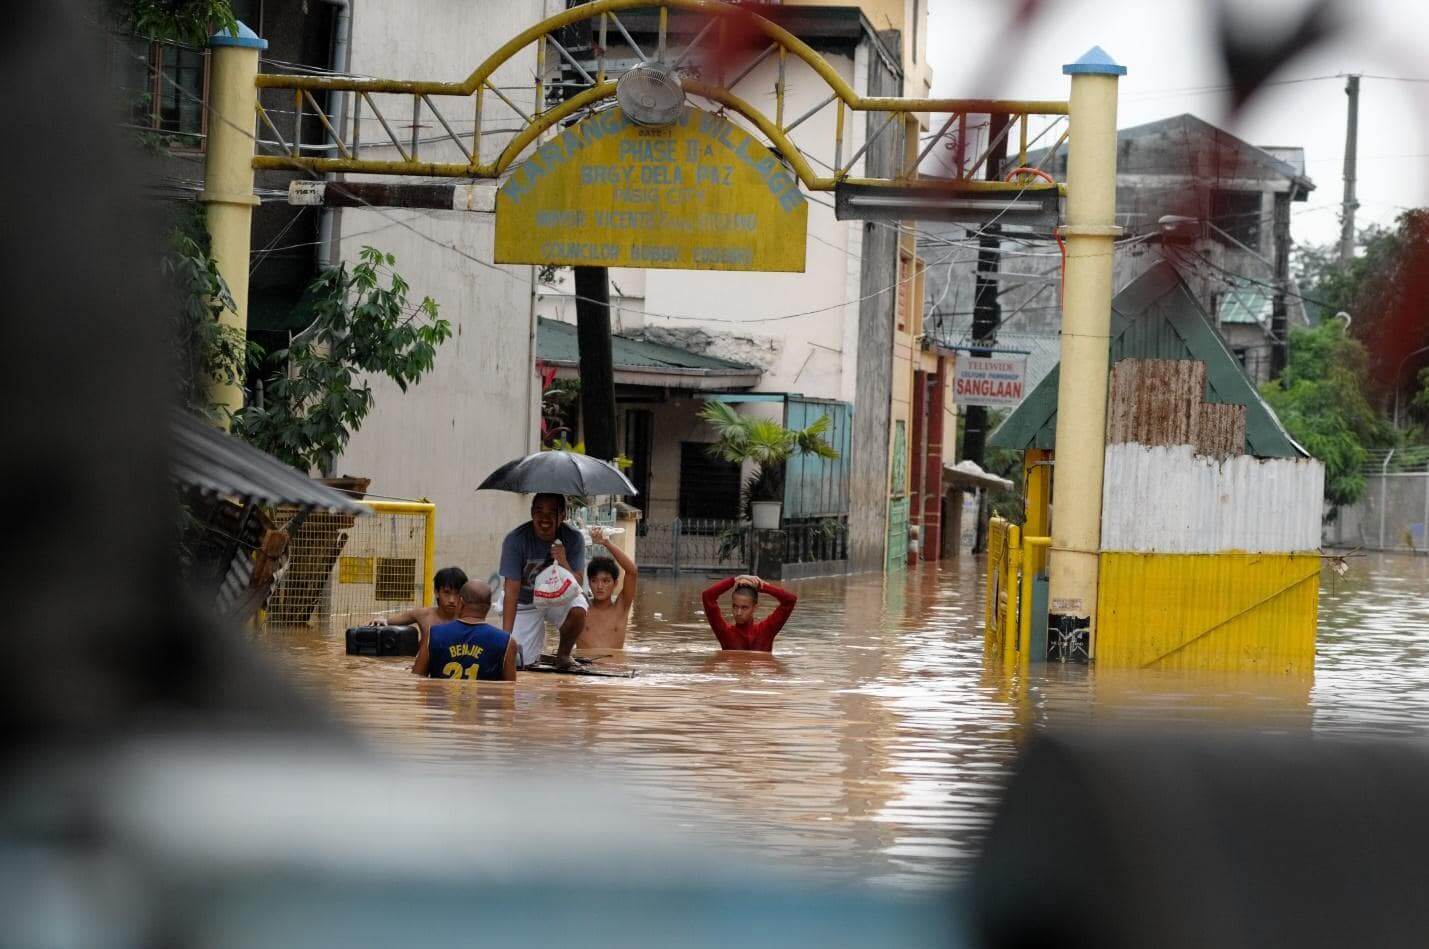 Flooding brought about by Typhoon Ondoy 2009